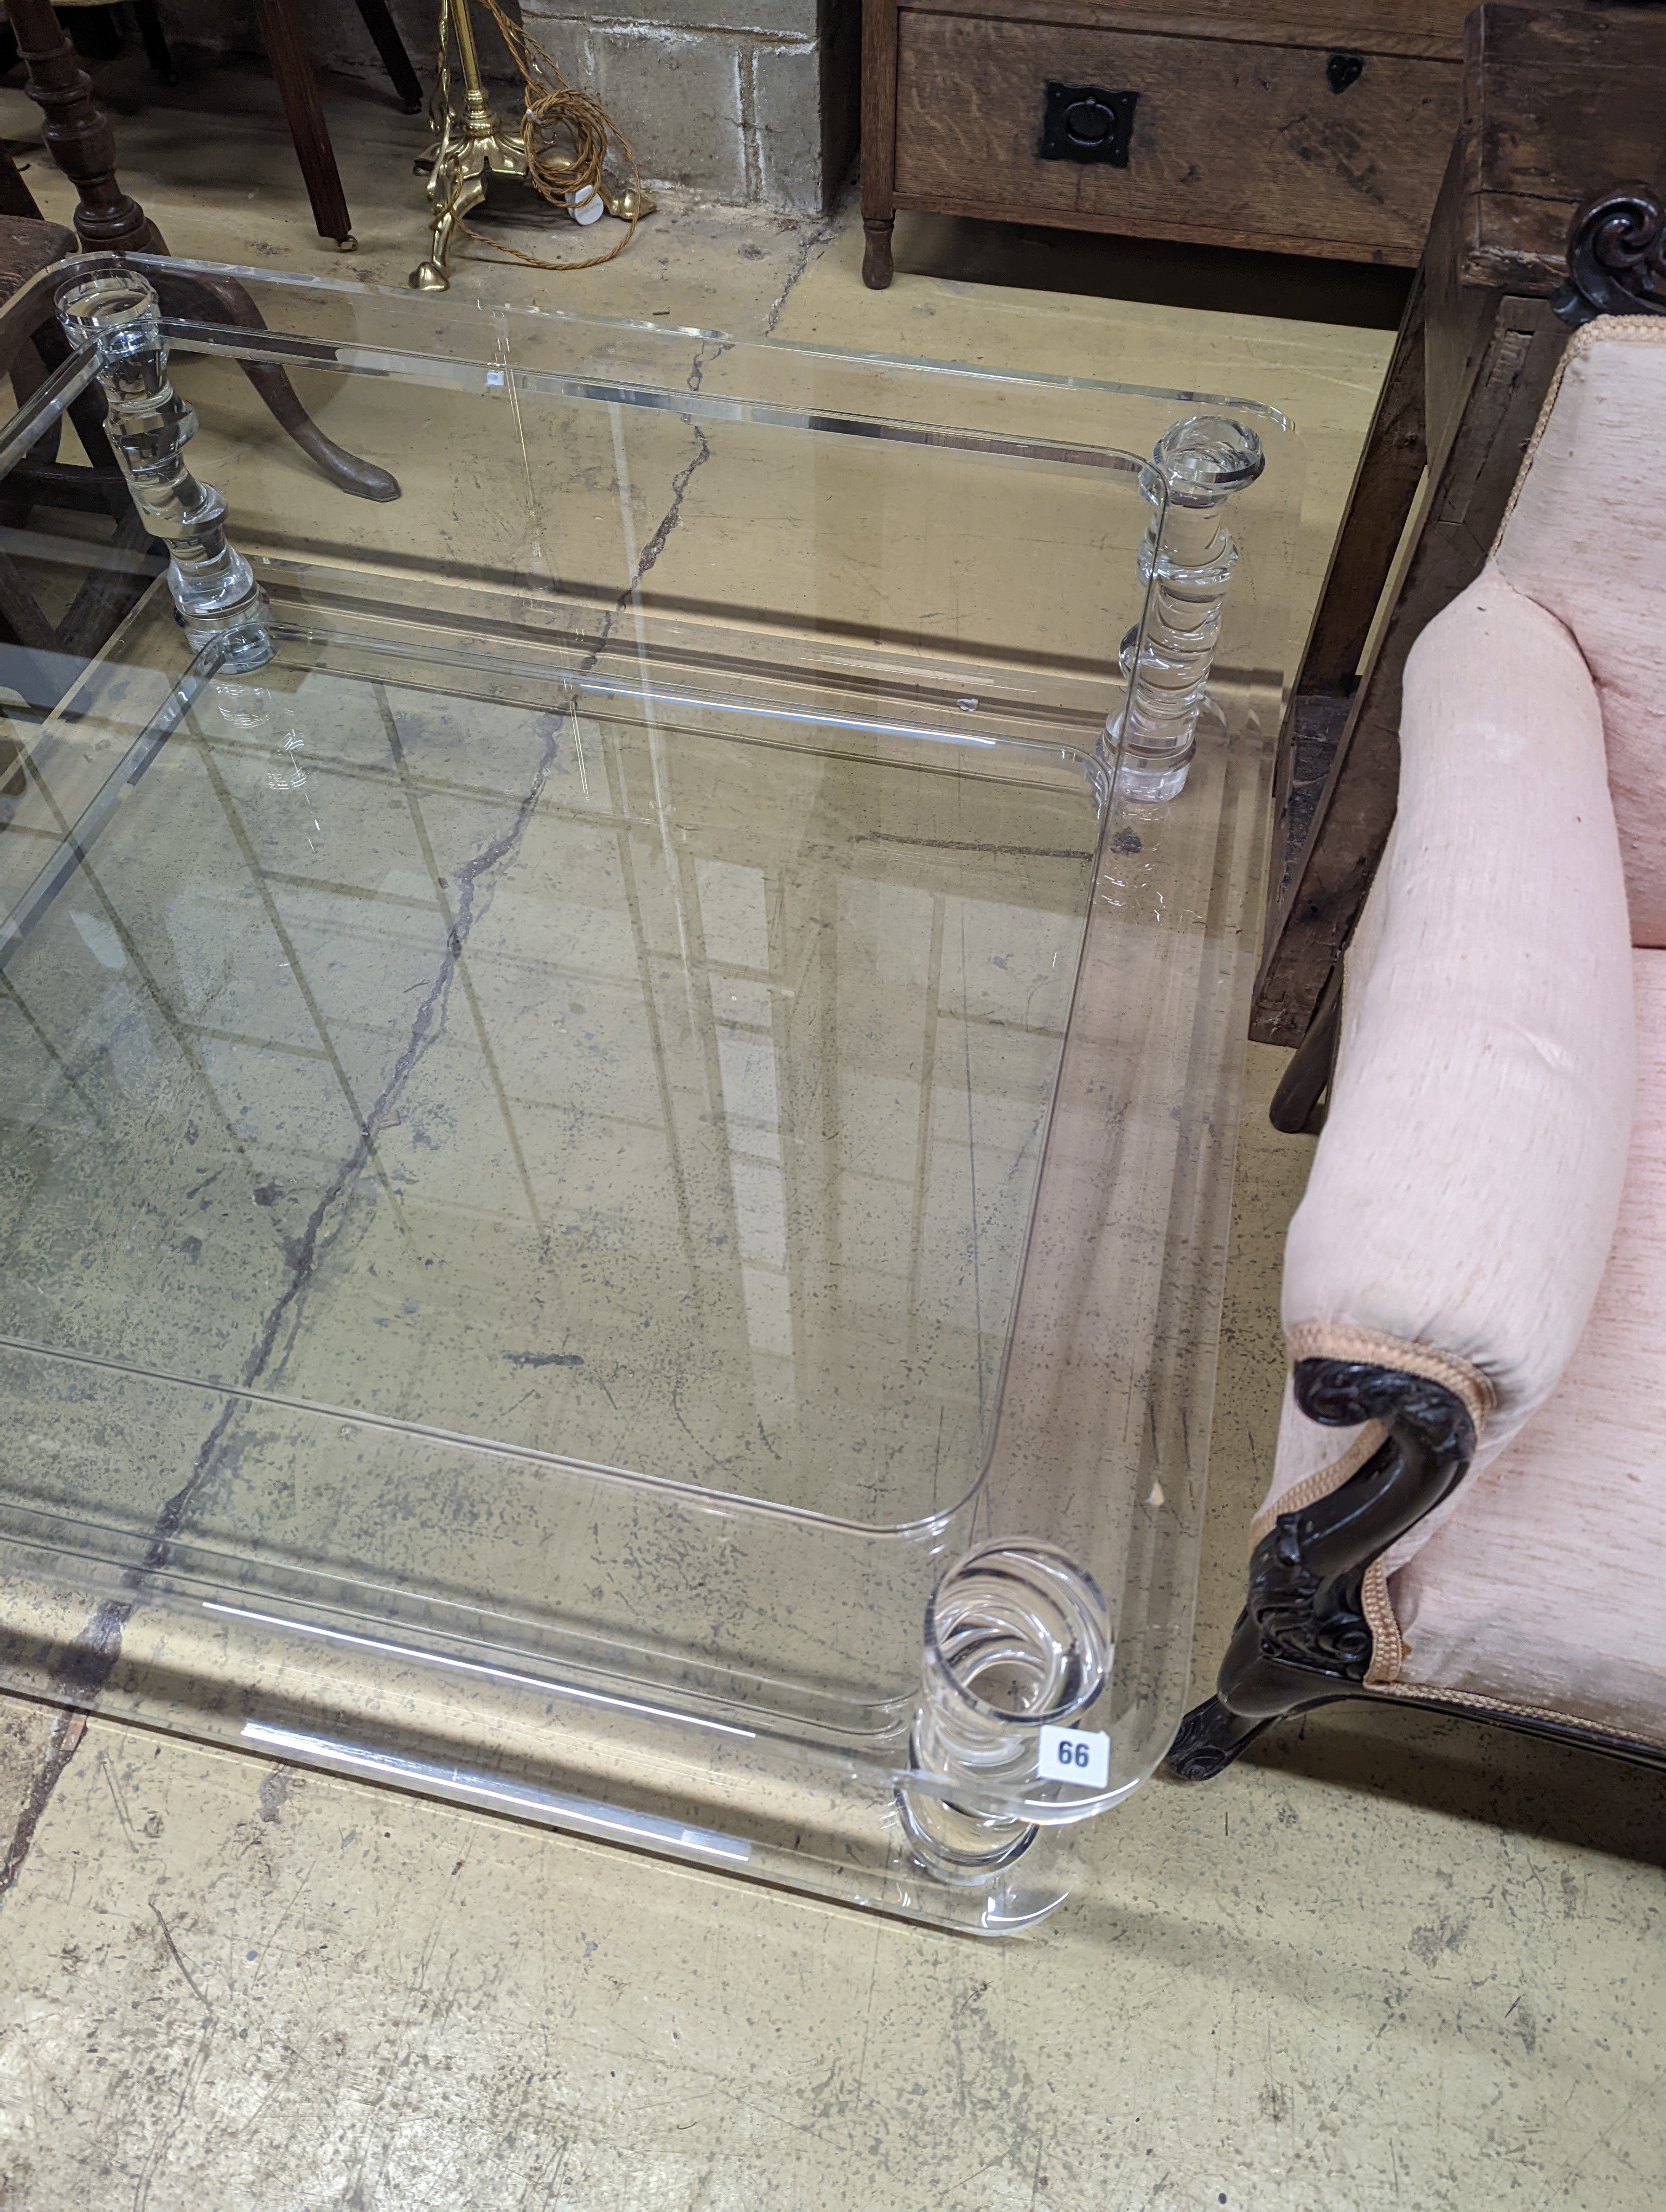 A contemporary perspex and glass square two tier coffee table, width 120cm, height 40cm